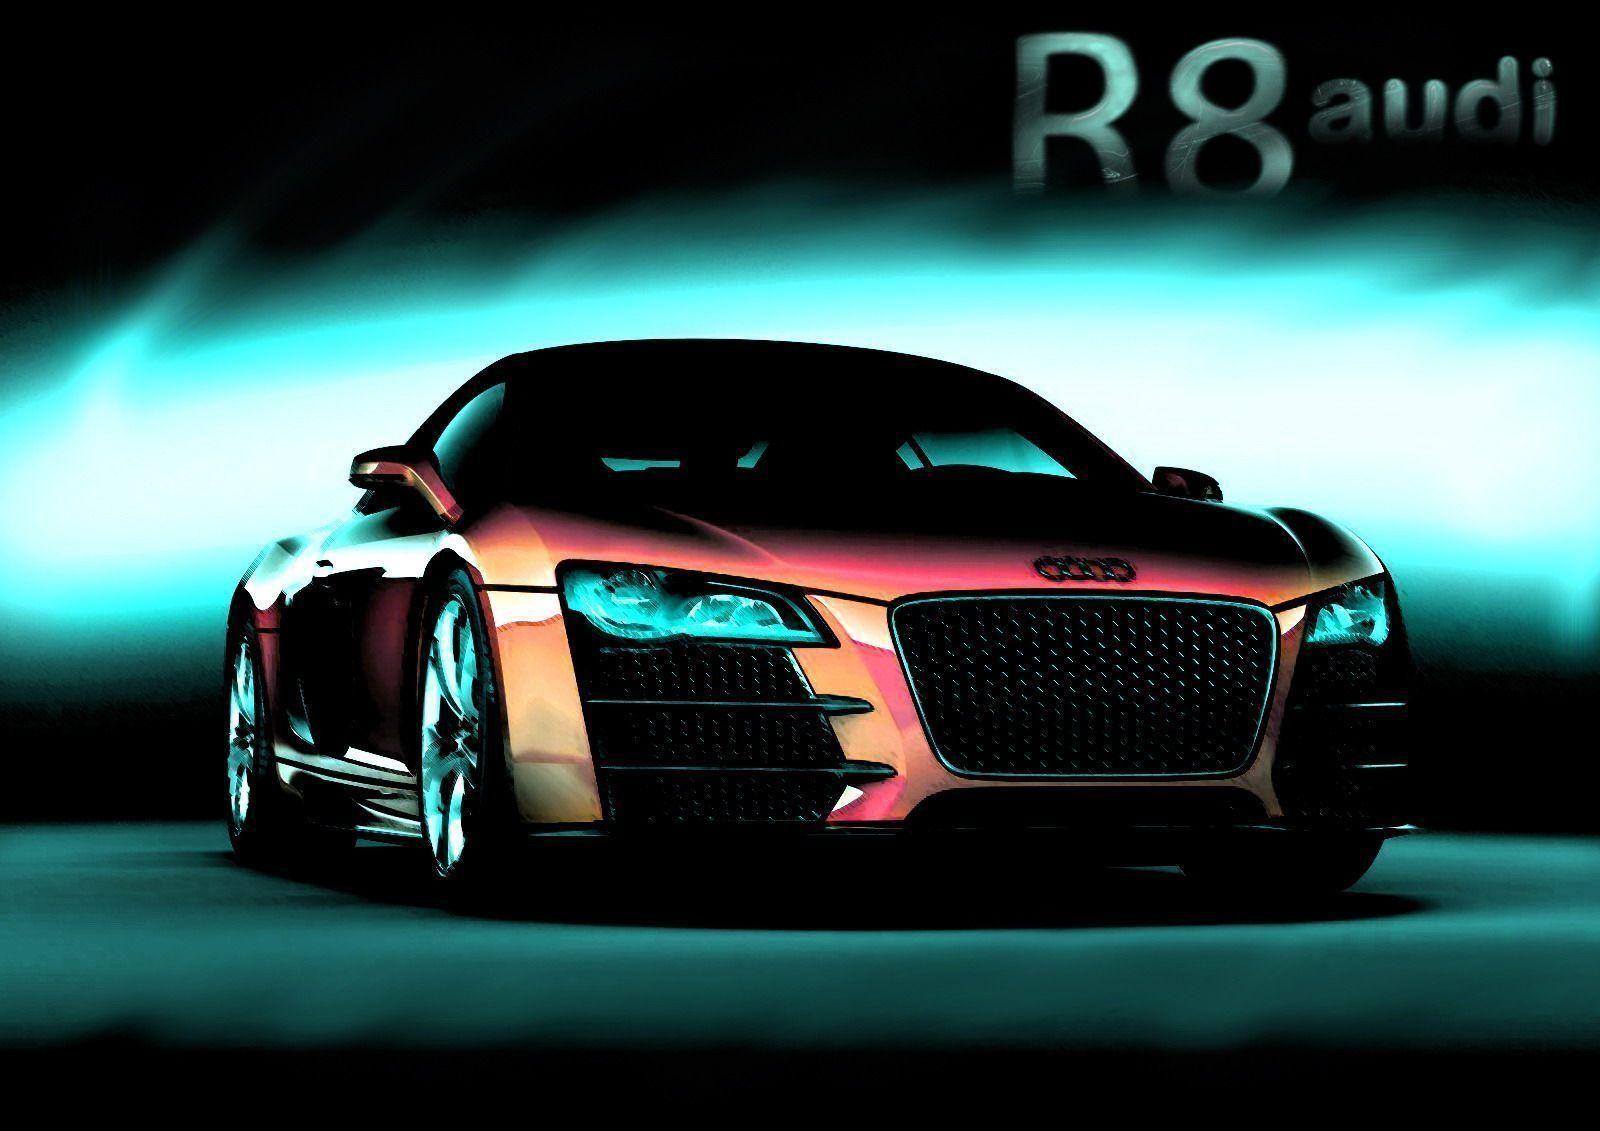 Audi R8 Computer Wallpapers - Top Free Audi R8 Computer Backgrounds ...